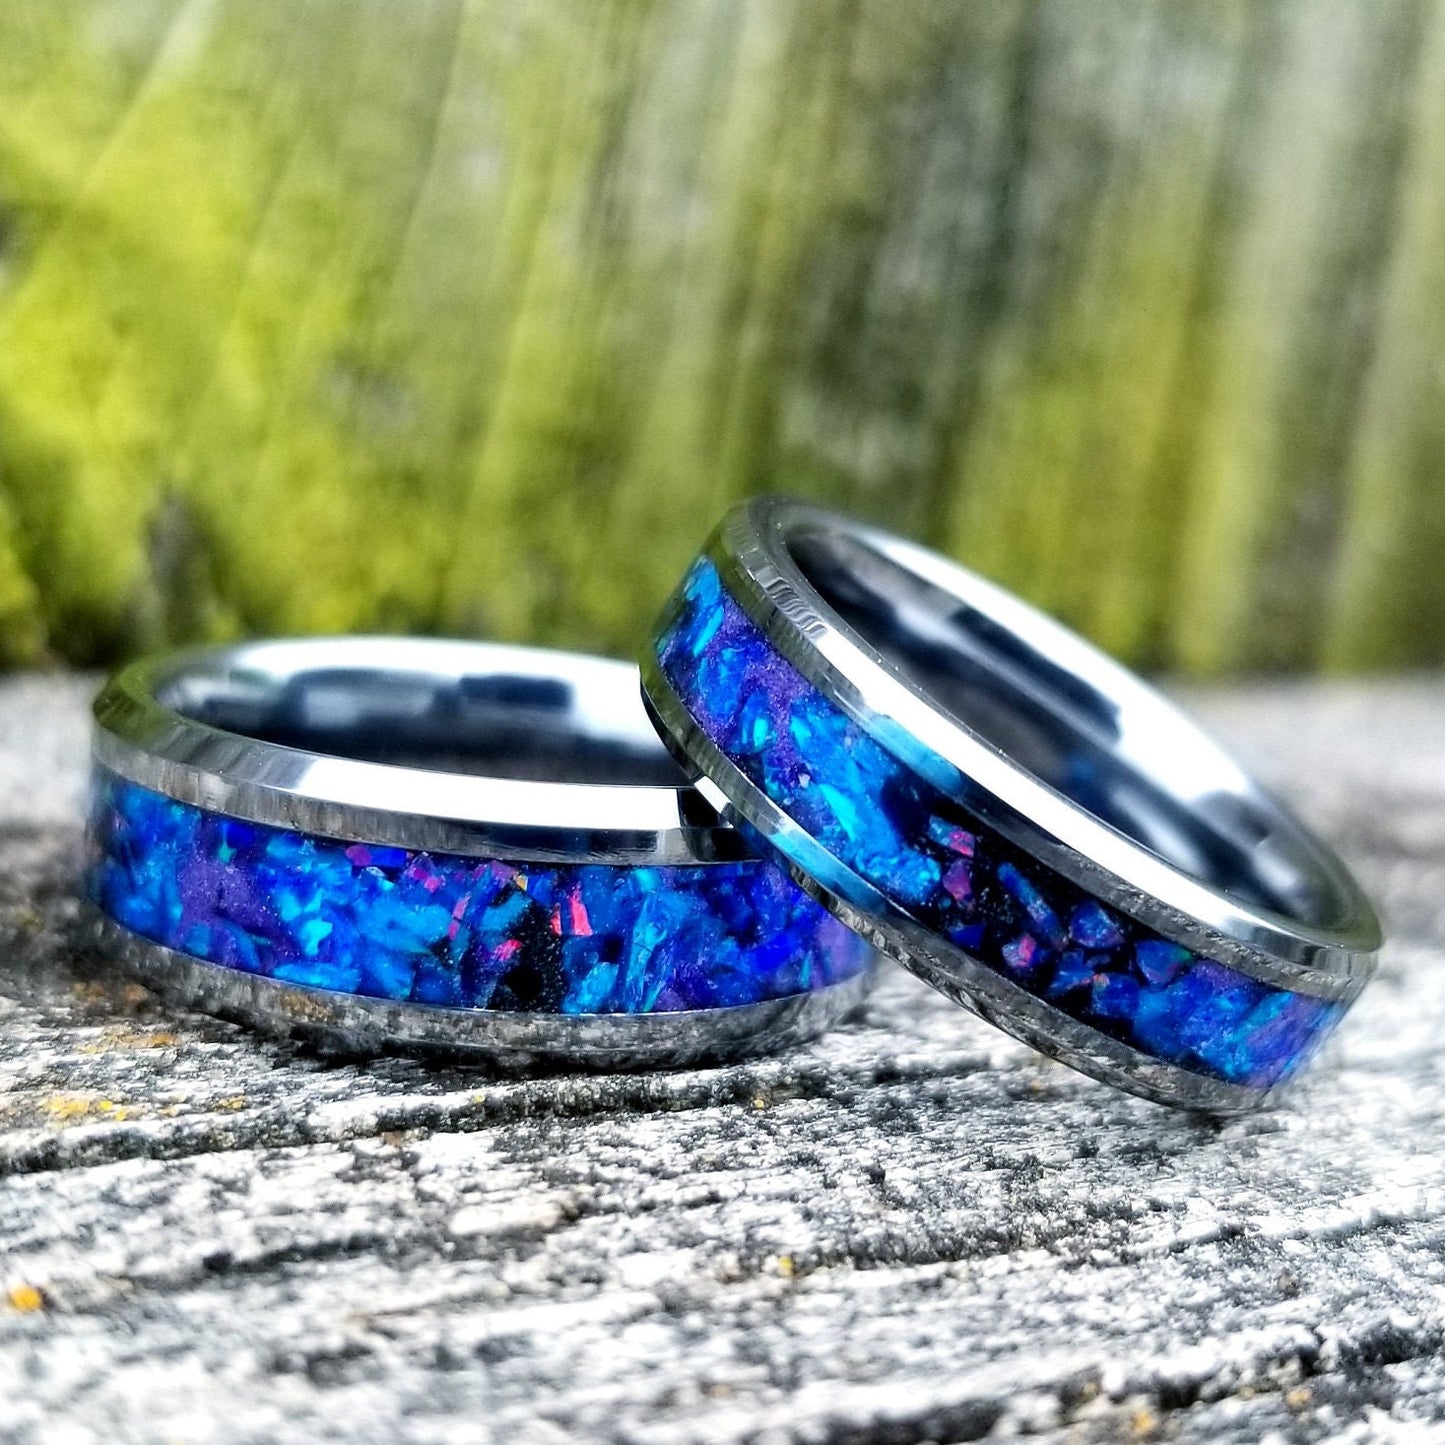 His and Hers wedding ring set. Galaxy fire opal ring. Tungsten glow ring set with violet opal and blue fire opal inlay. Sizes 5-13